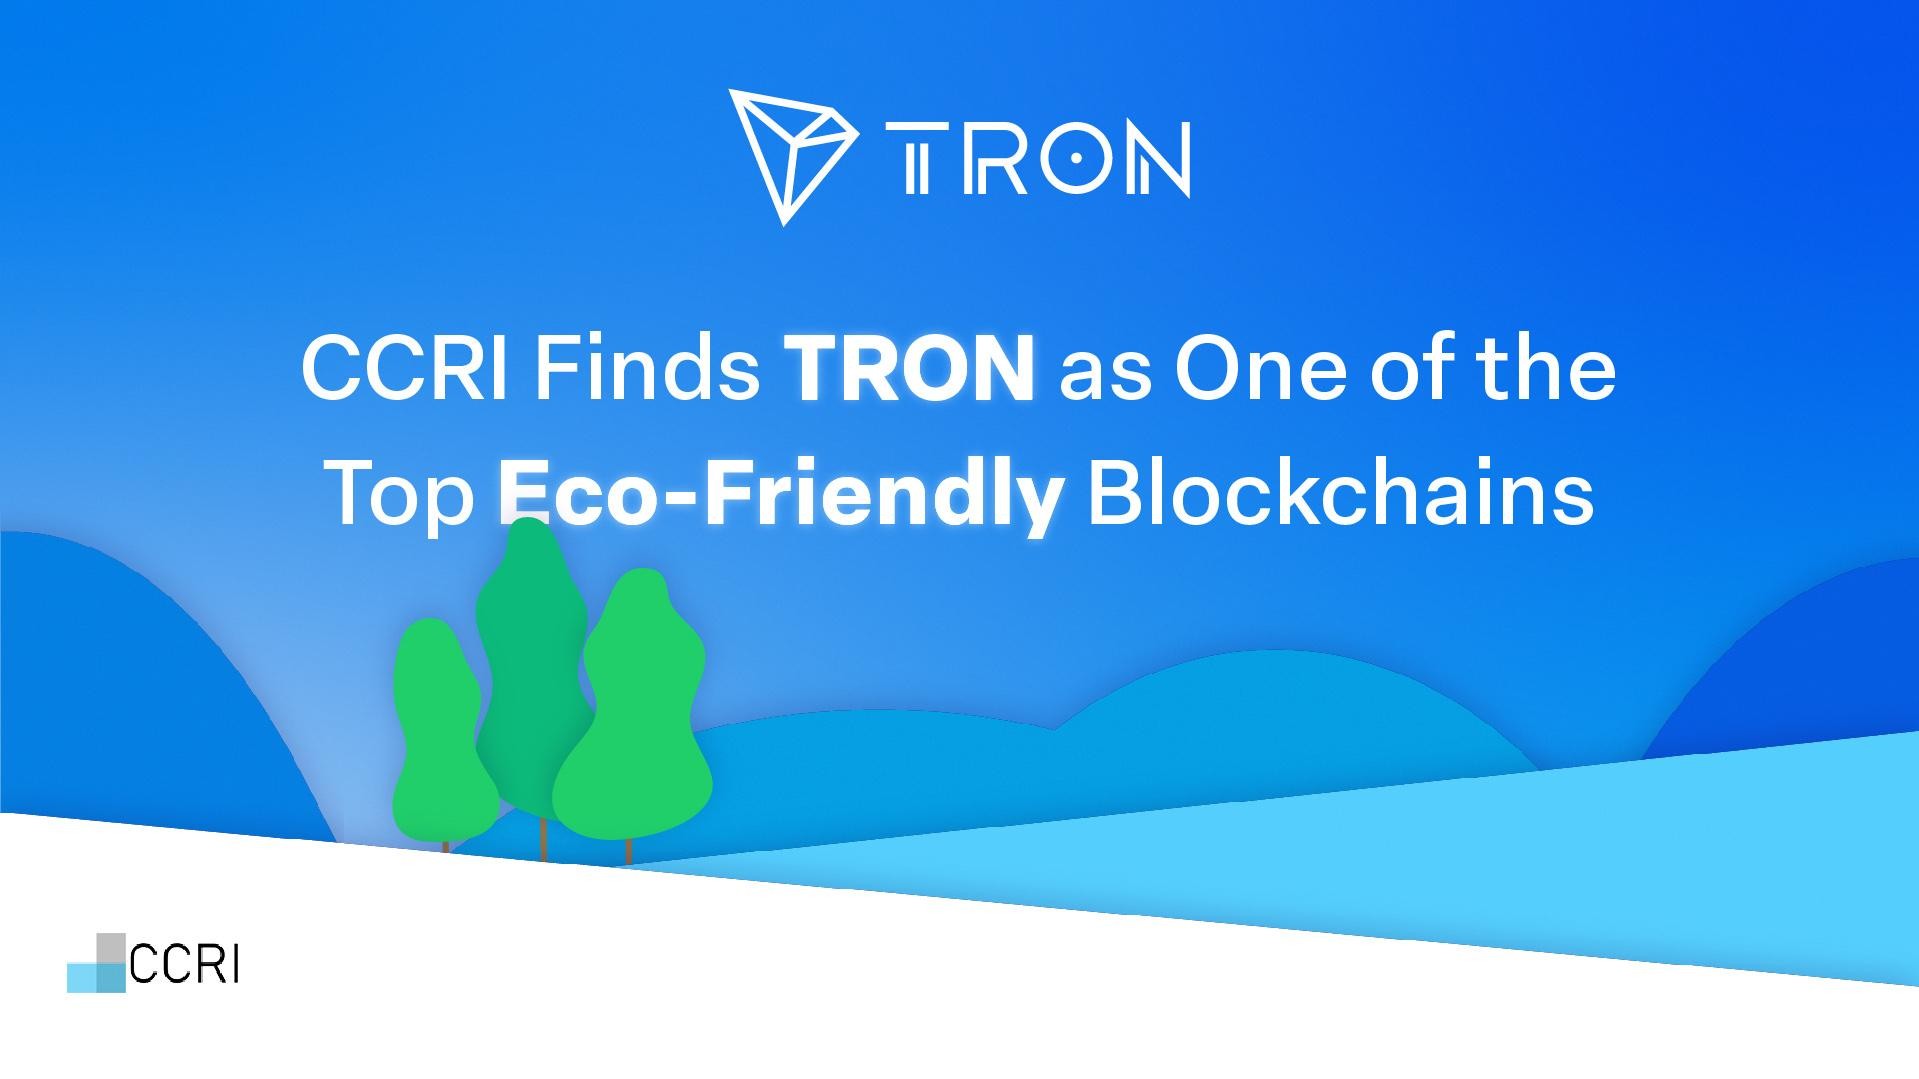 CCRI Finds TRON as One of the Top Eco-Friendly Blockchains